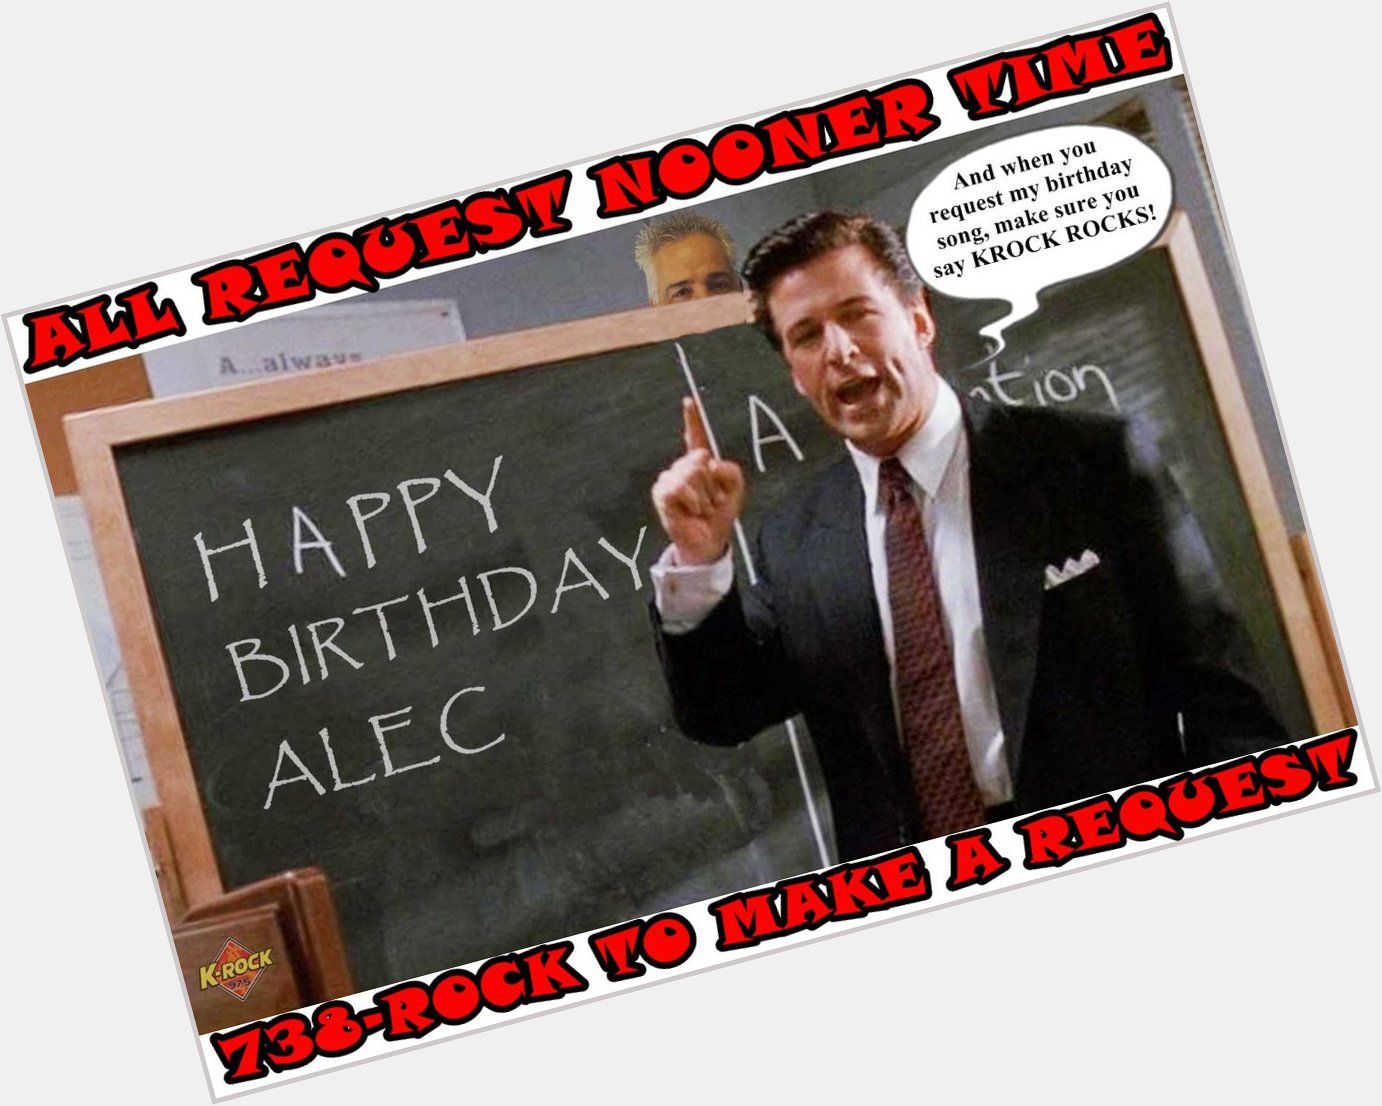 Happy birthday Alec Baldwin!
It\s All Request Nooner time. 
Call your request in on the ROCKLINE, 738-ROCK - TA 